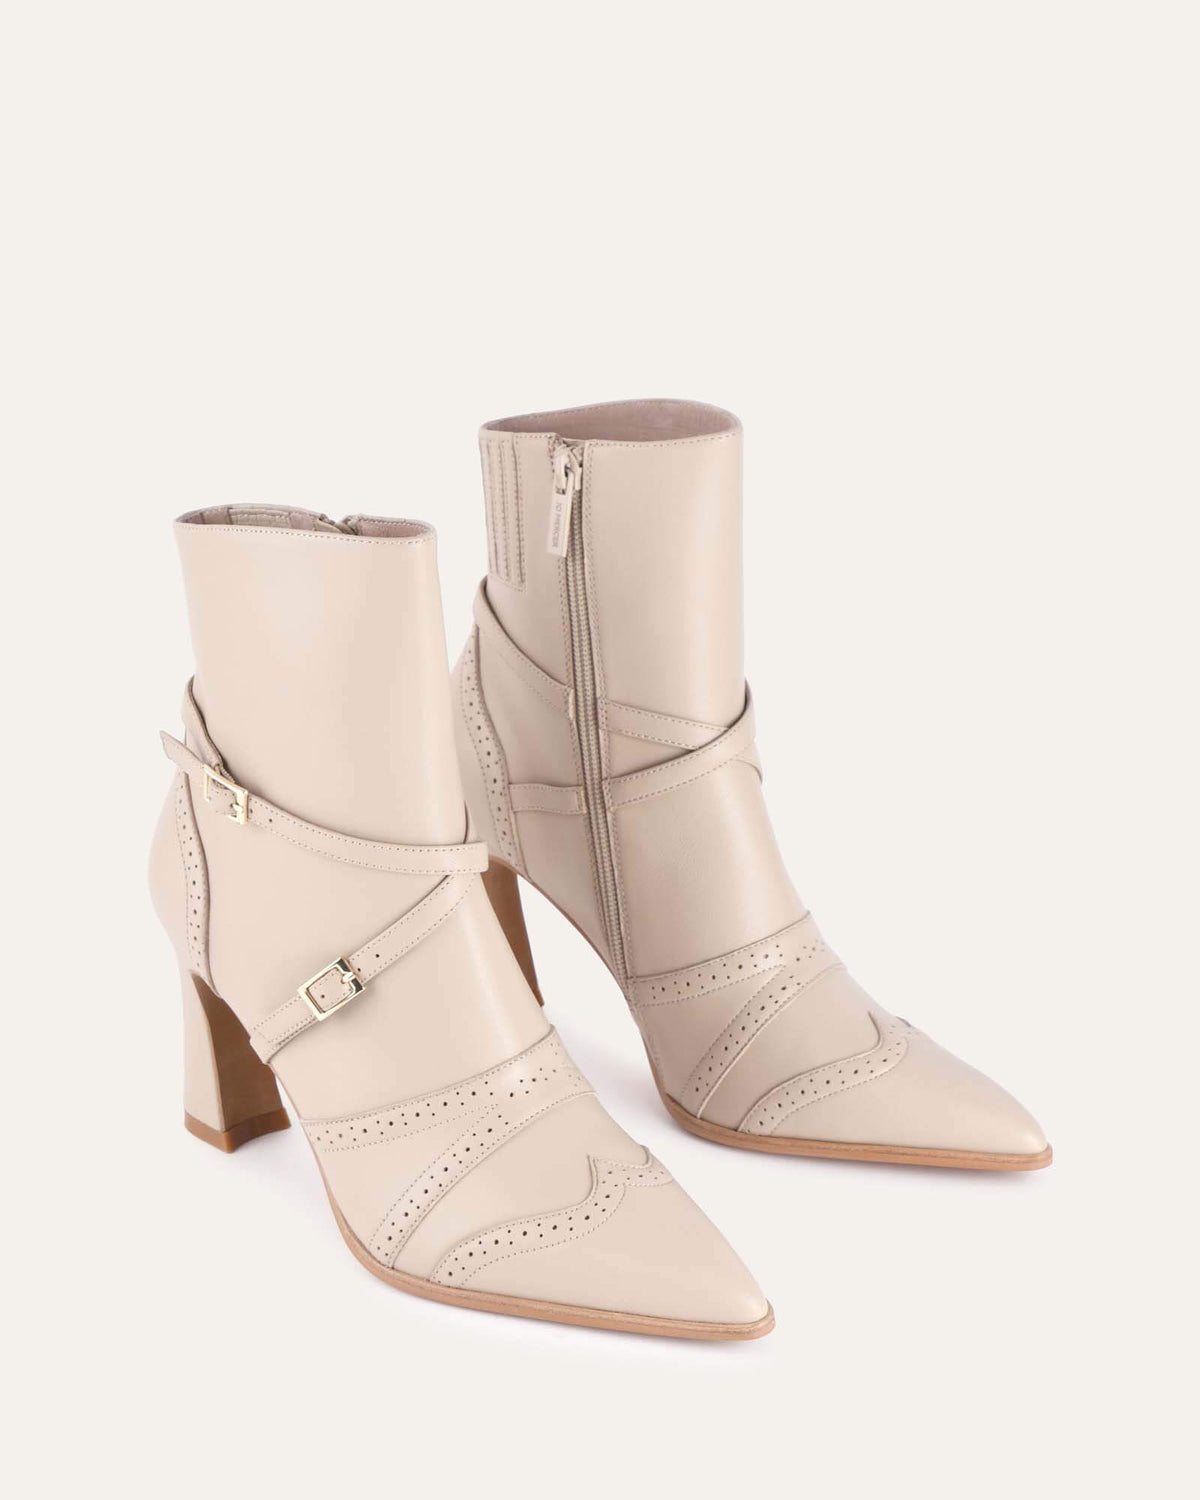 VIENNA HIGH ANKLE BOOTS SAND LEATHER